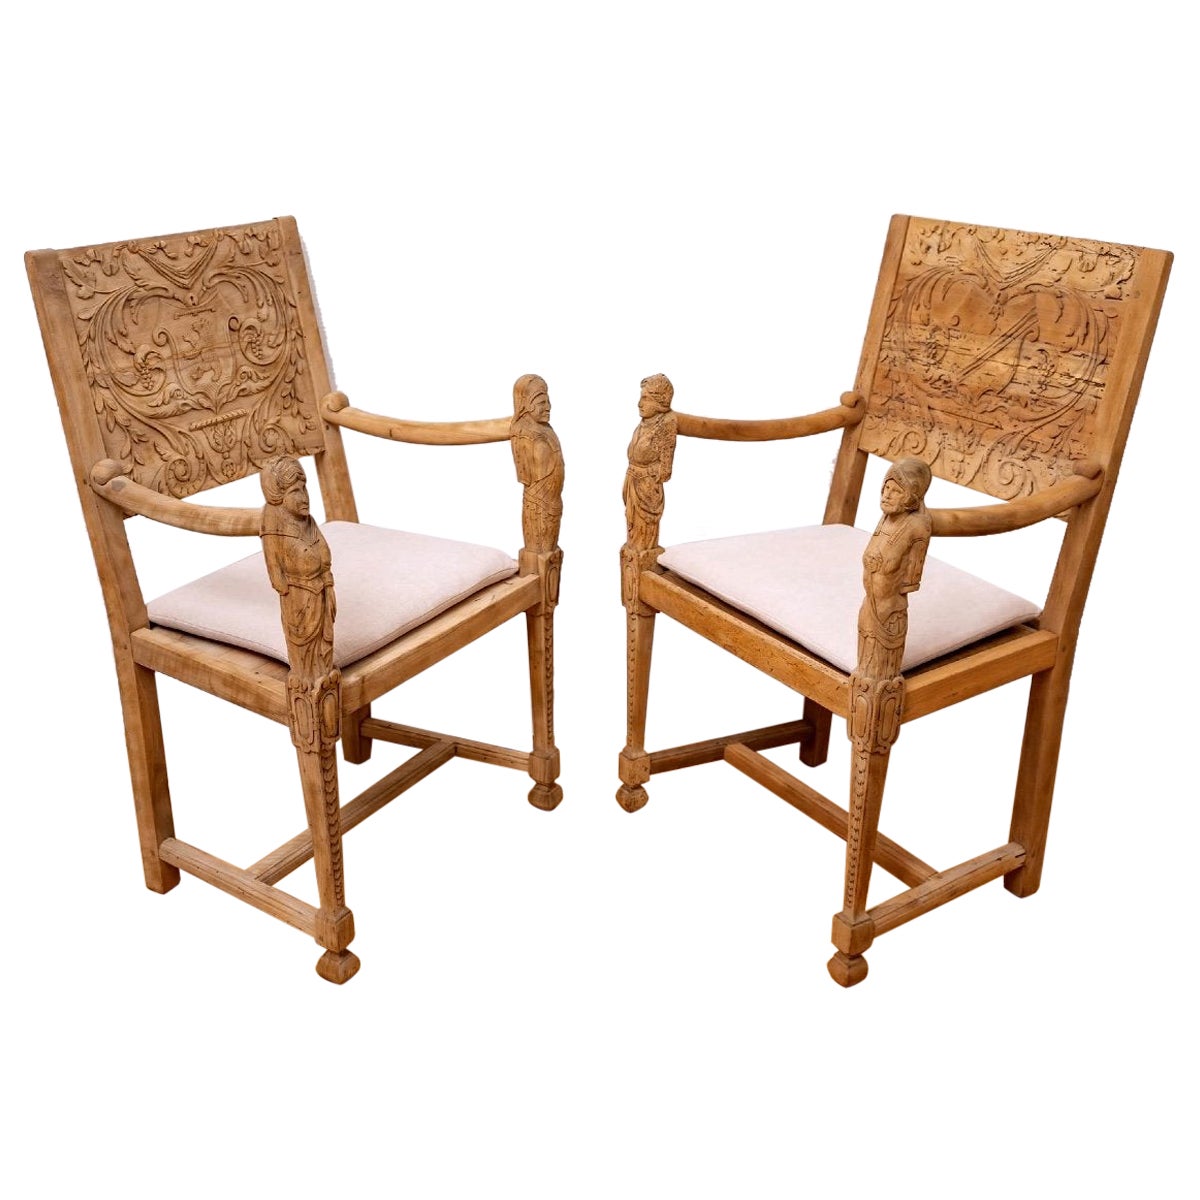 Pair of Neo-Gothic Ceremonial Armchairs, Solid Walnut, Period: 19th Century